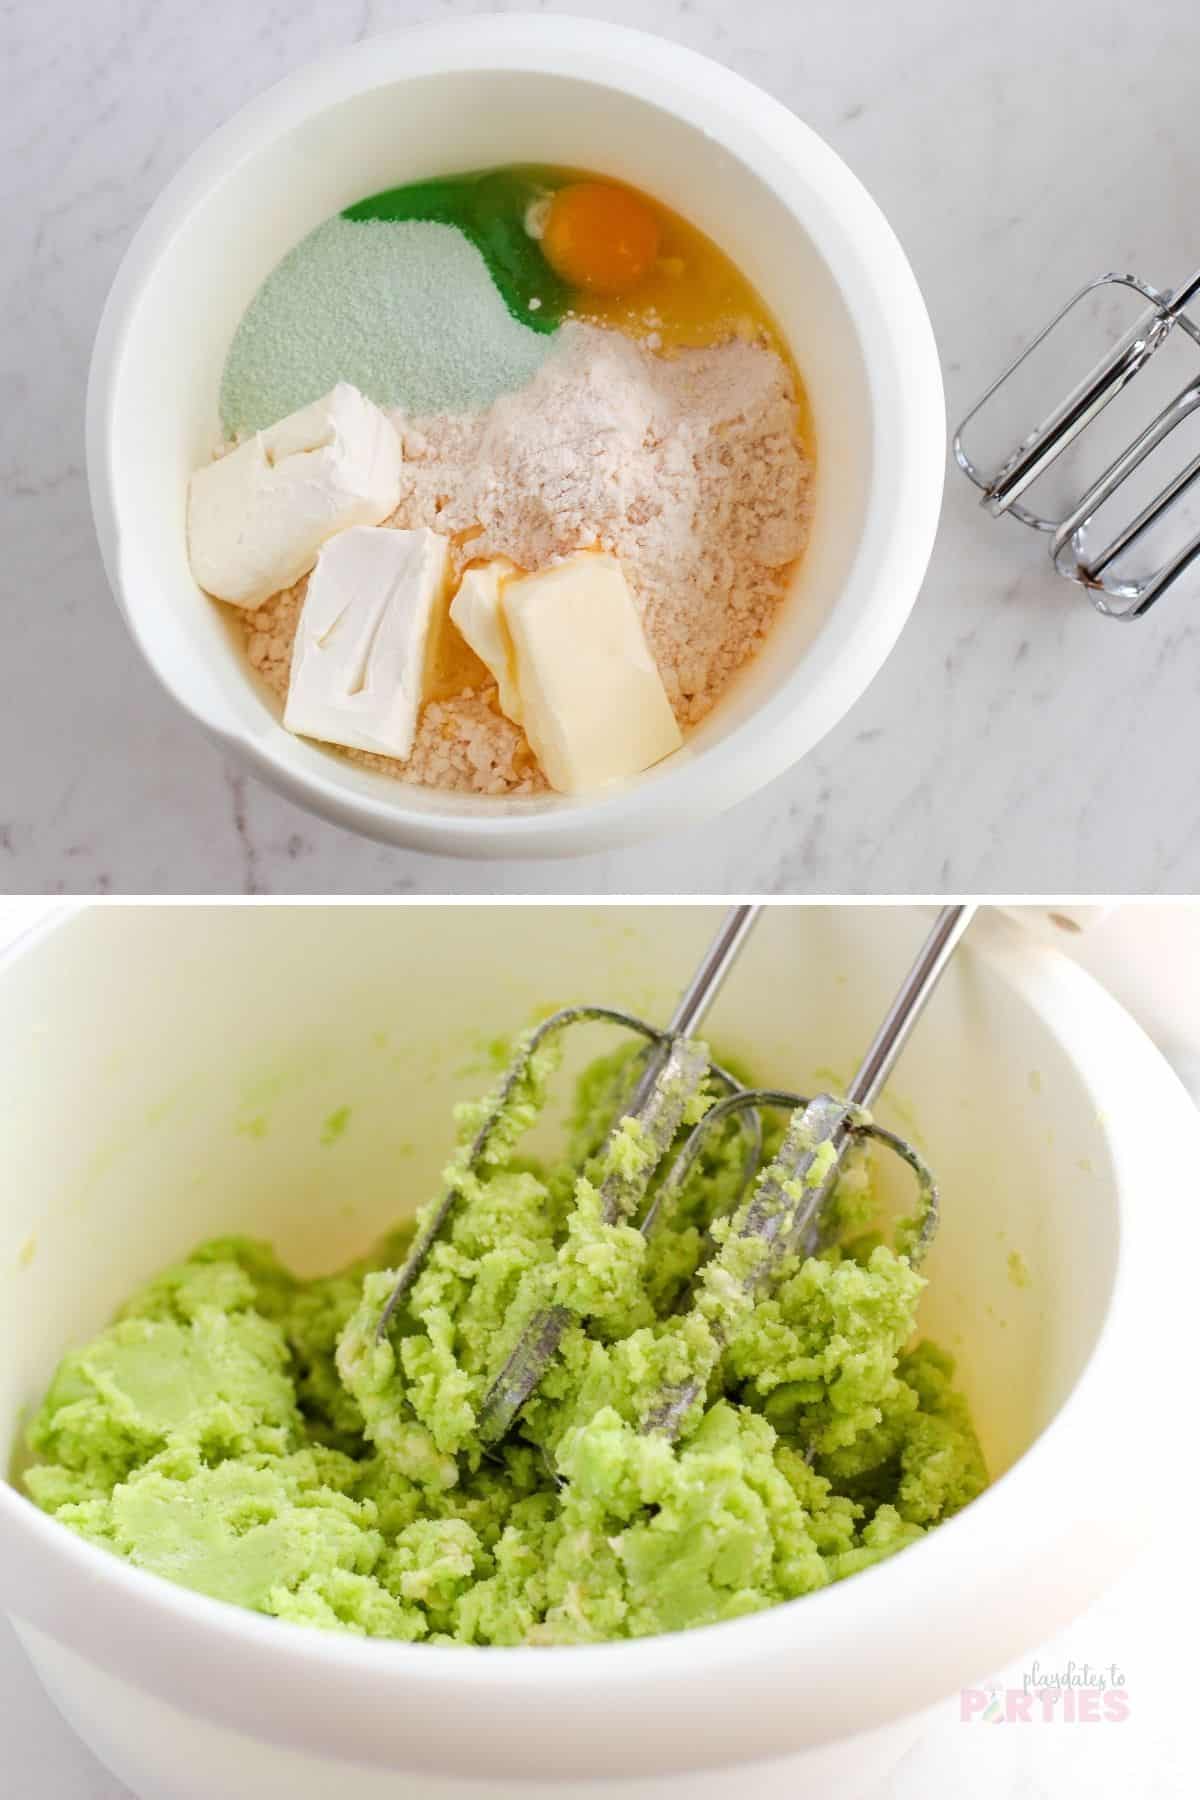 Mixing together green cookie dough.